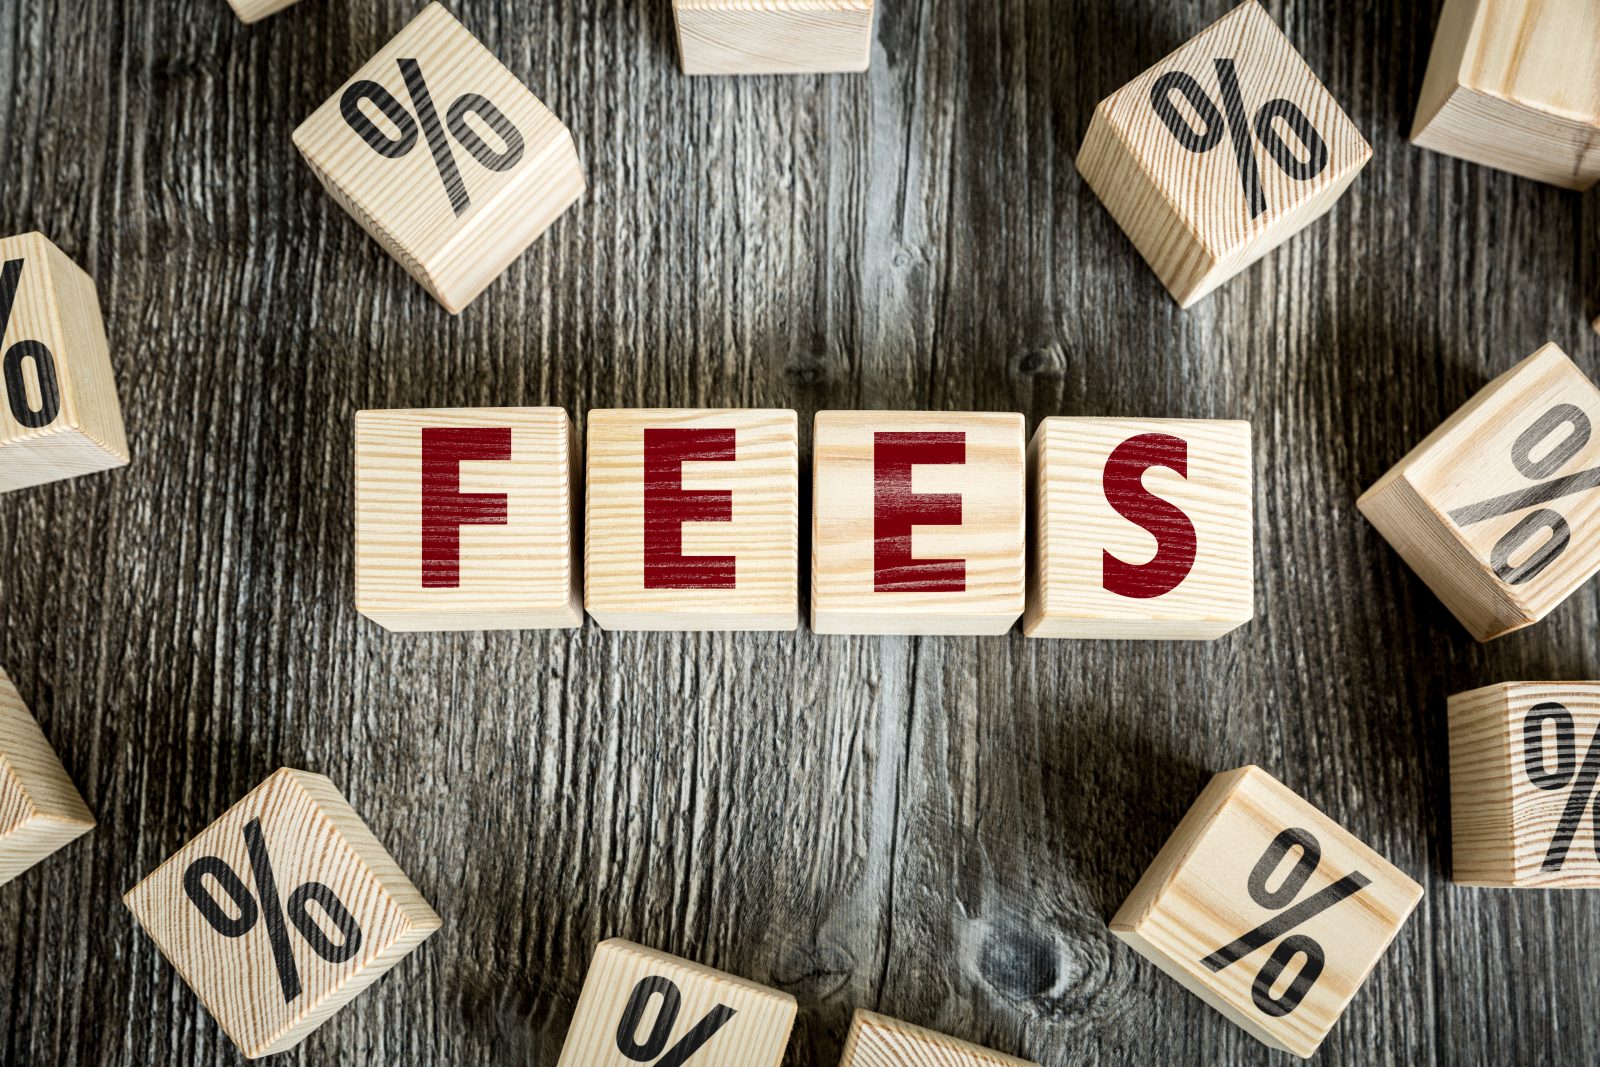 Blocks that spell out the word fees surrounded by other blocks with percentage signs referencing the fees that are charged for merchant accounts.